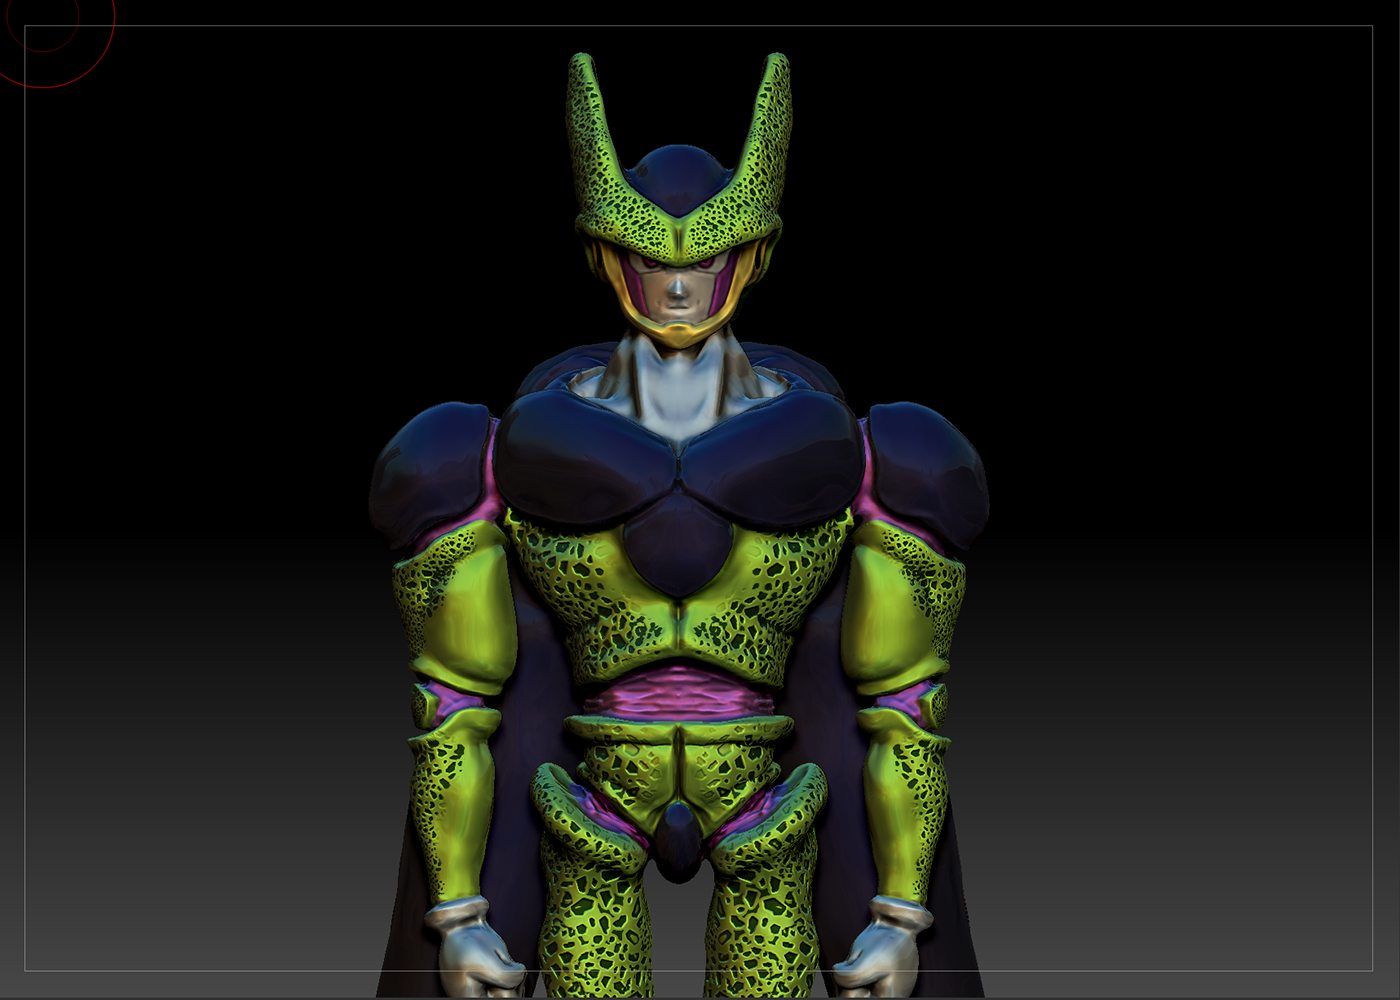 Dragon Ball Z Character - Cell on Behance